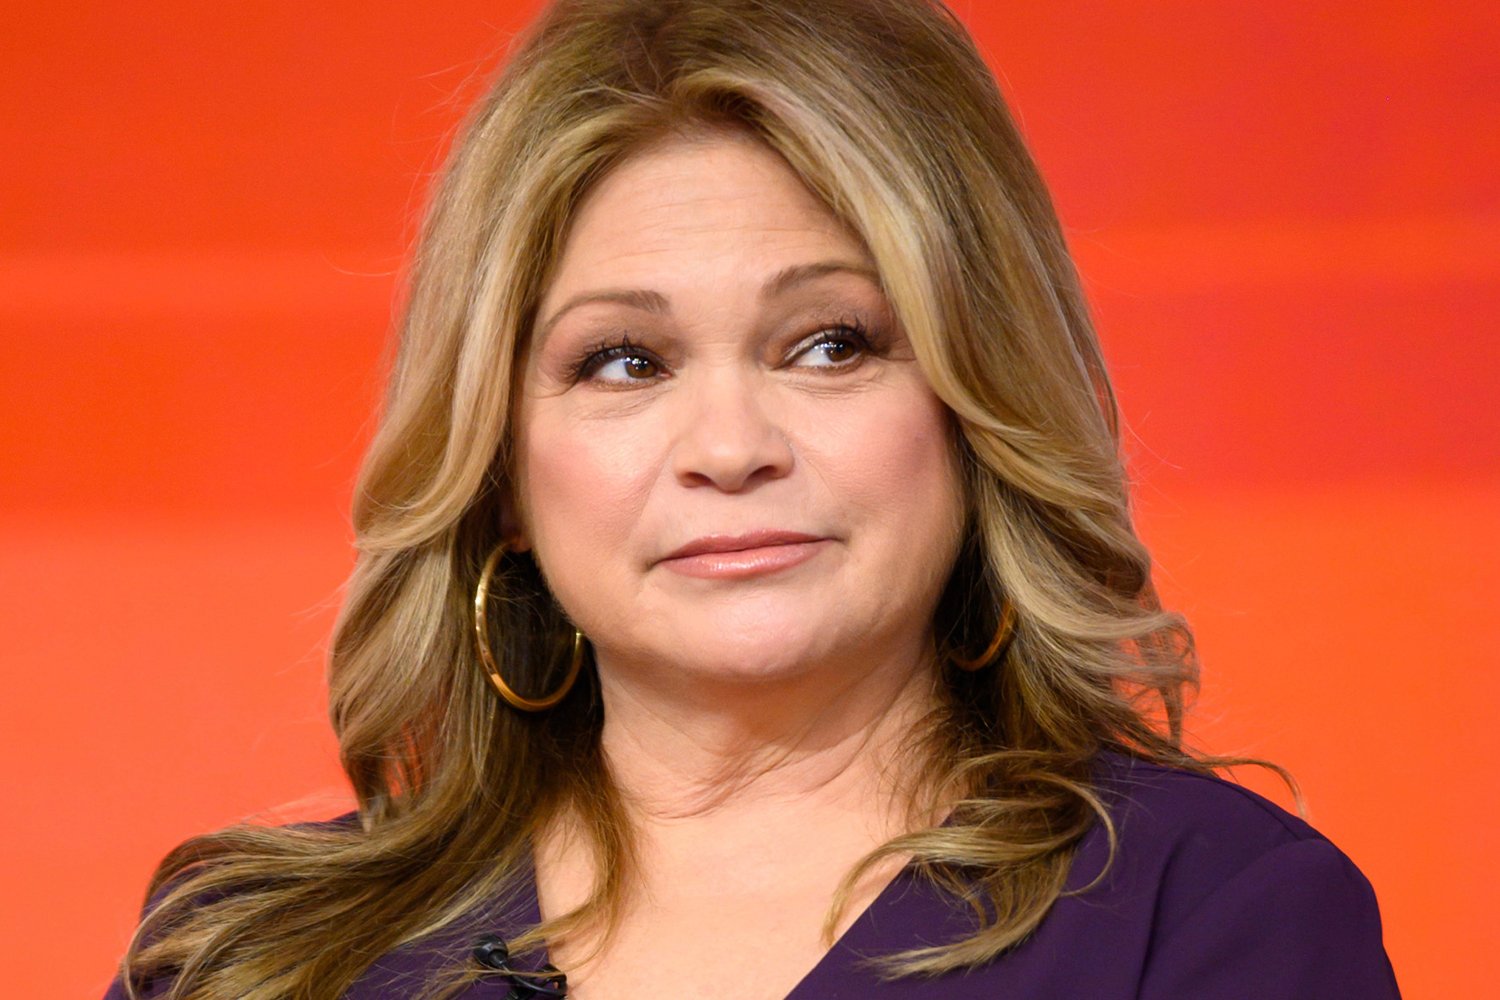 Valerie Bertinelli serious during an interview